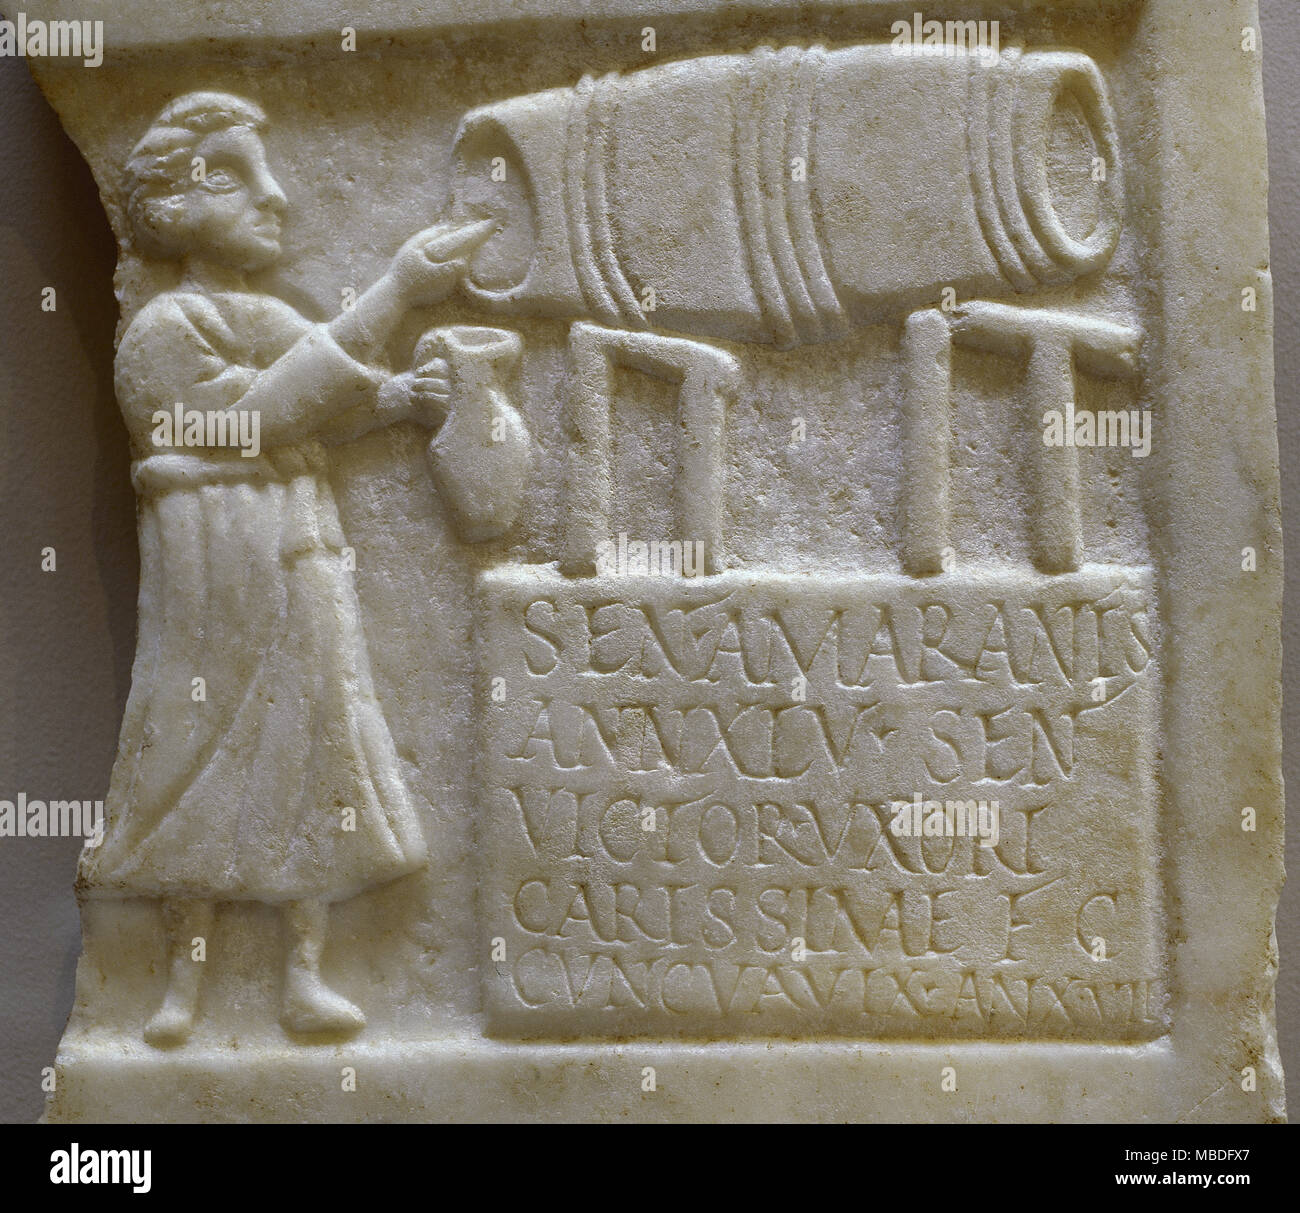 Funerary stele of Sentia Amarantis. The figure of the innkeeper appears filling a jug with wine from a barrel. In the inscription, the husband dedicates the tombstone to the deceased. 2nd-3rd century AD. Marble. National Museum of Roman Art. Merida, province of Badajoz, Extremadura, Spain. Stock Photo